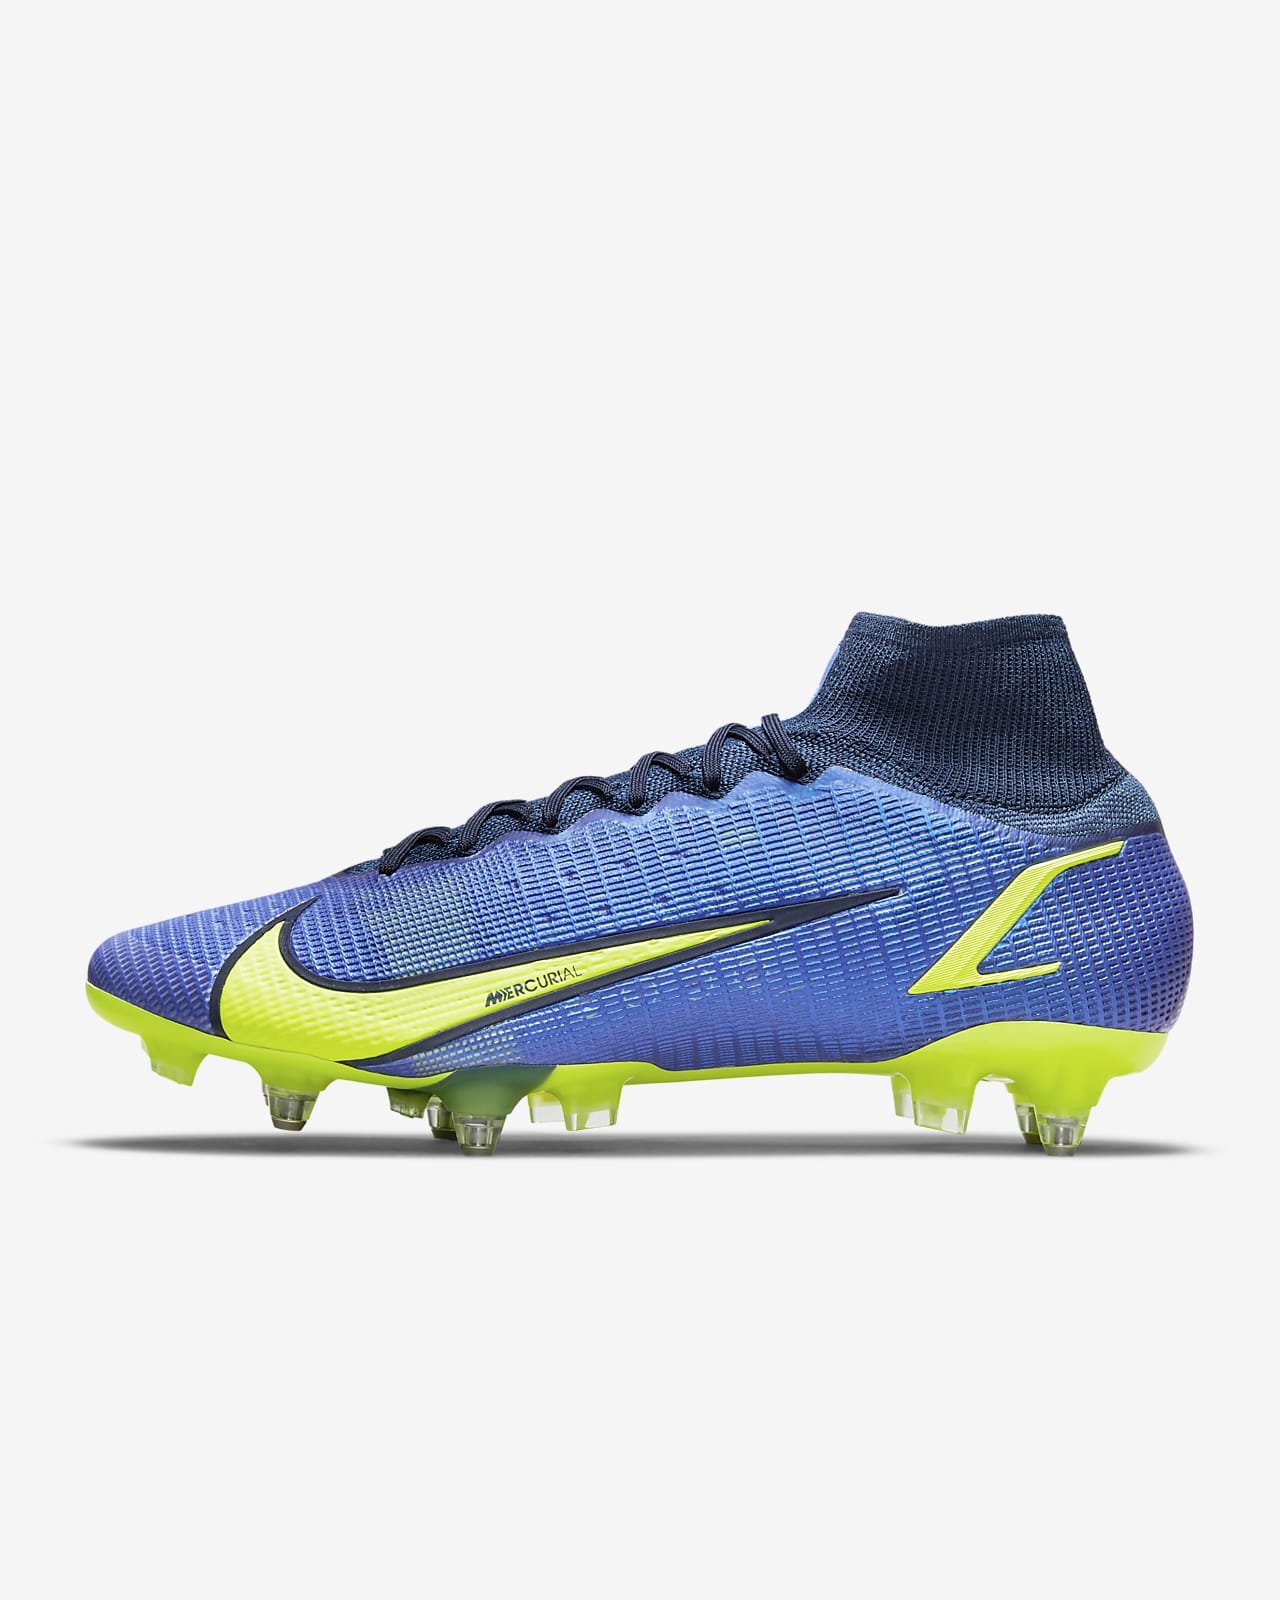 Nike Mercurial Superfly 8 Elite SG-Pro AC Soft-Ground Football Boot